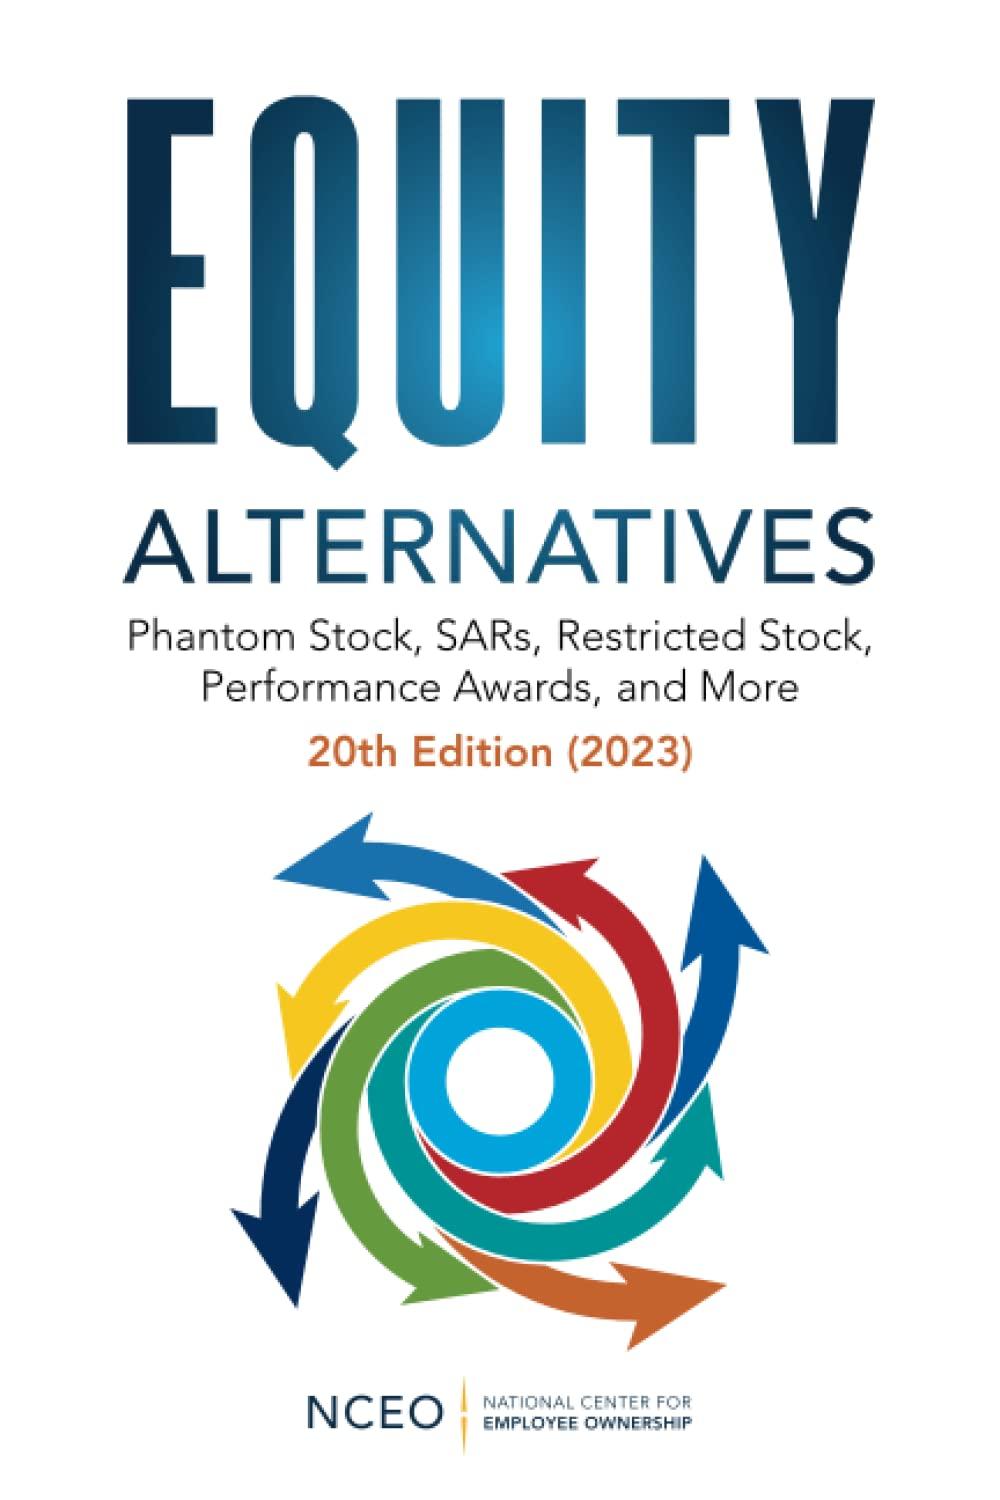 equity alternatives phantom stock sars restricted stock performance awards and more 2023 20th edition corey